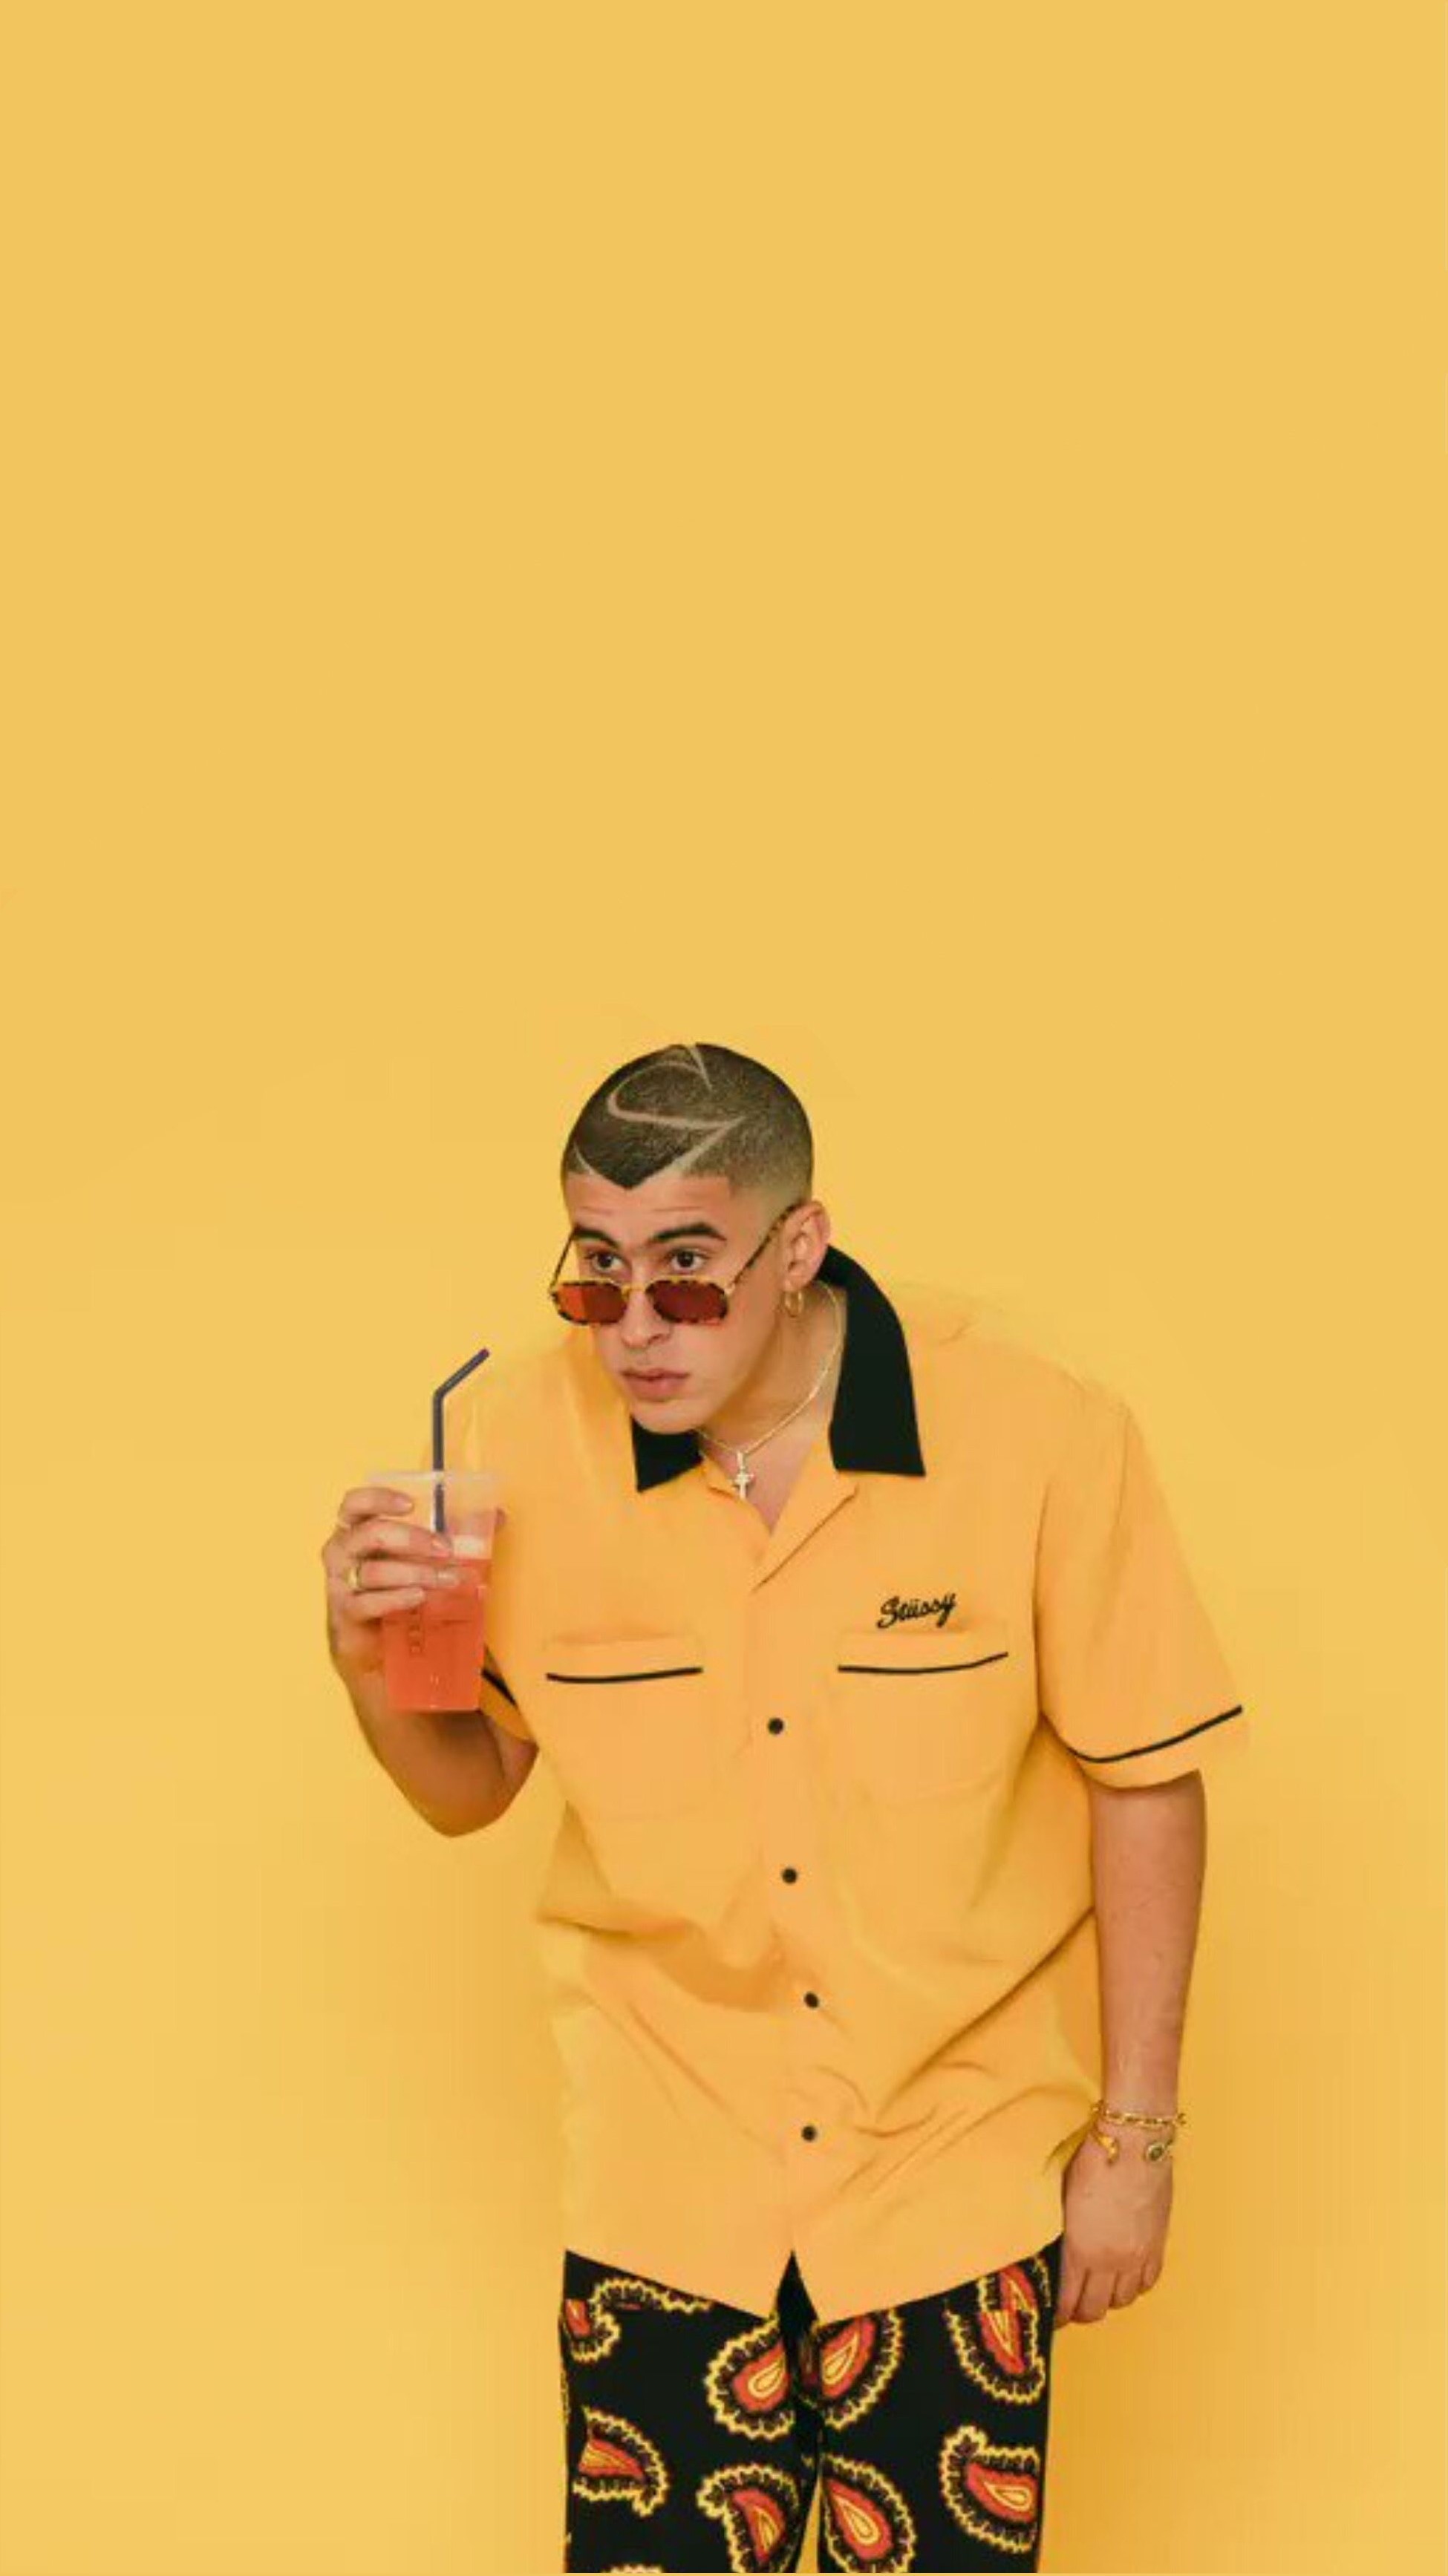 Bad Bunny Wallpaper  756 Bad Bunny Wallpaper 1080p 2K 4K 5K Aesthetic  2023  485 Mood off DP Images Photos Pics Download 2023